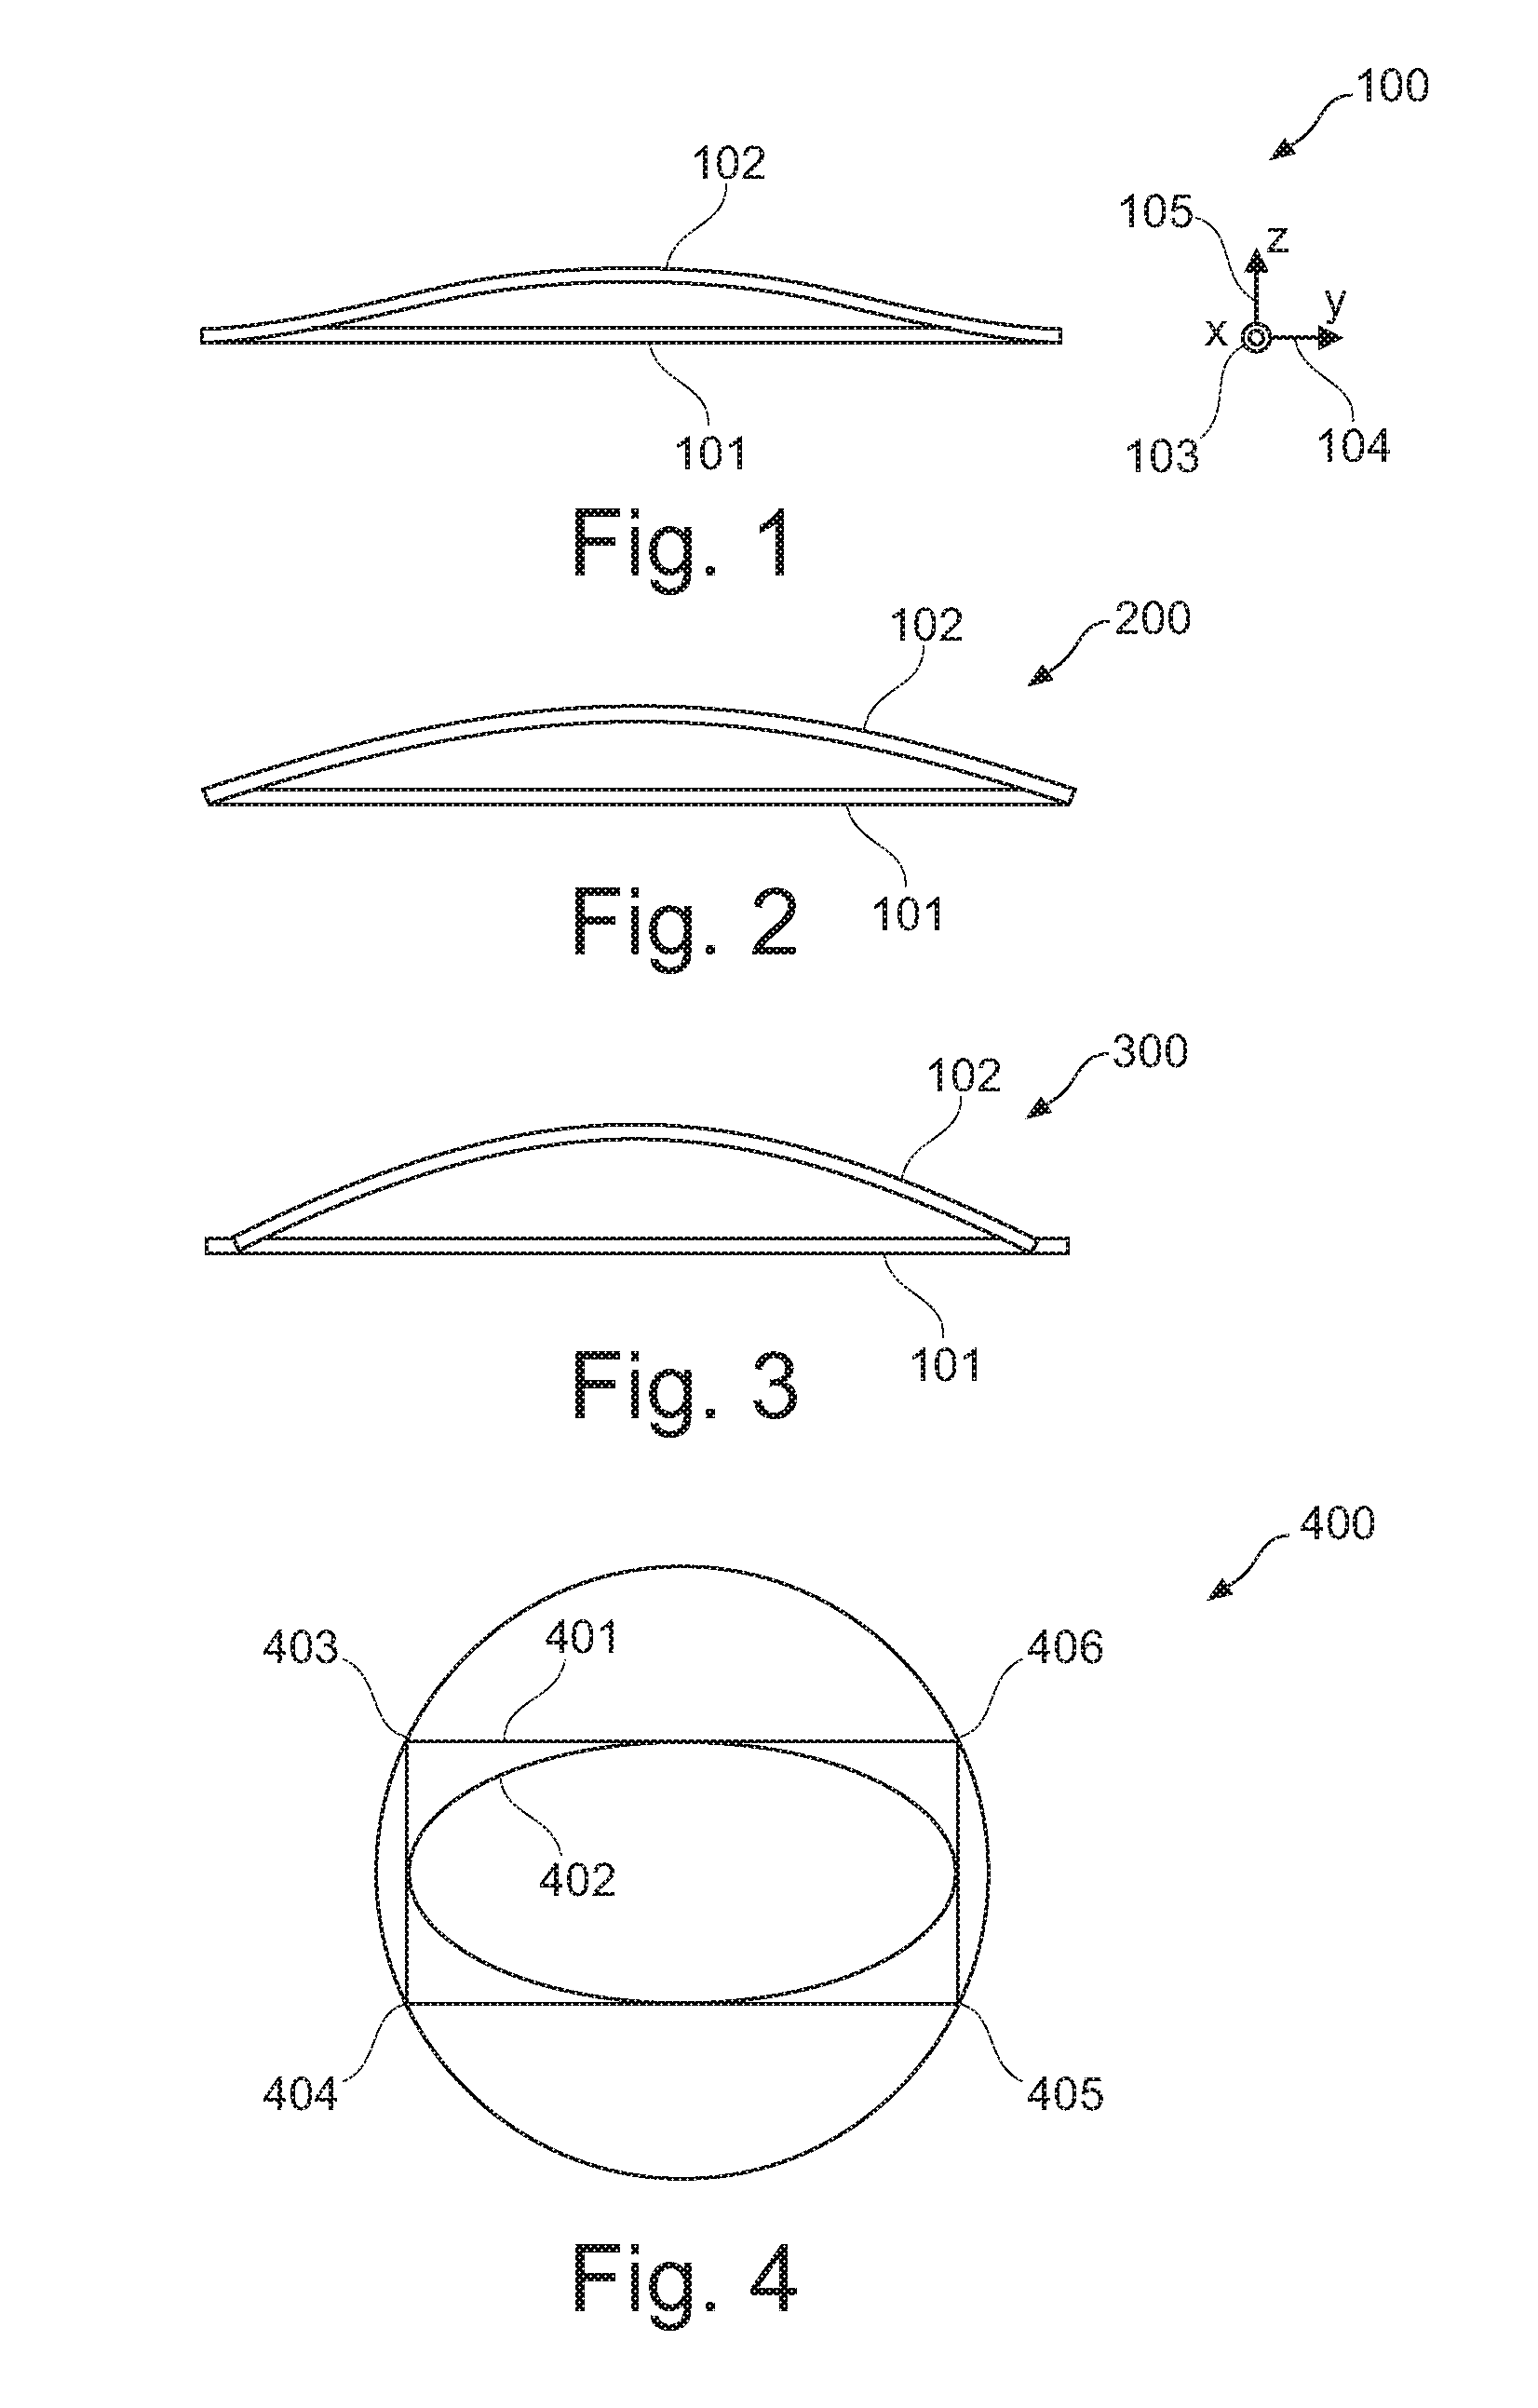 Acoustic device and method of manufacturing same